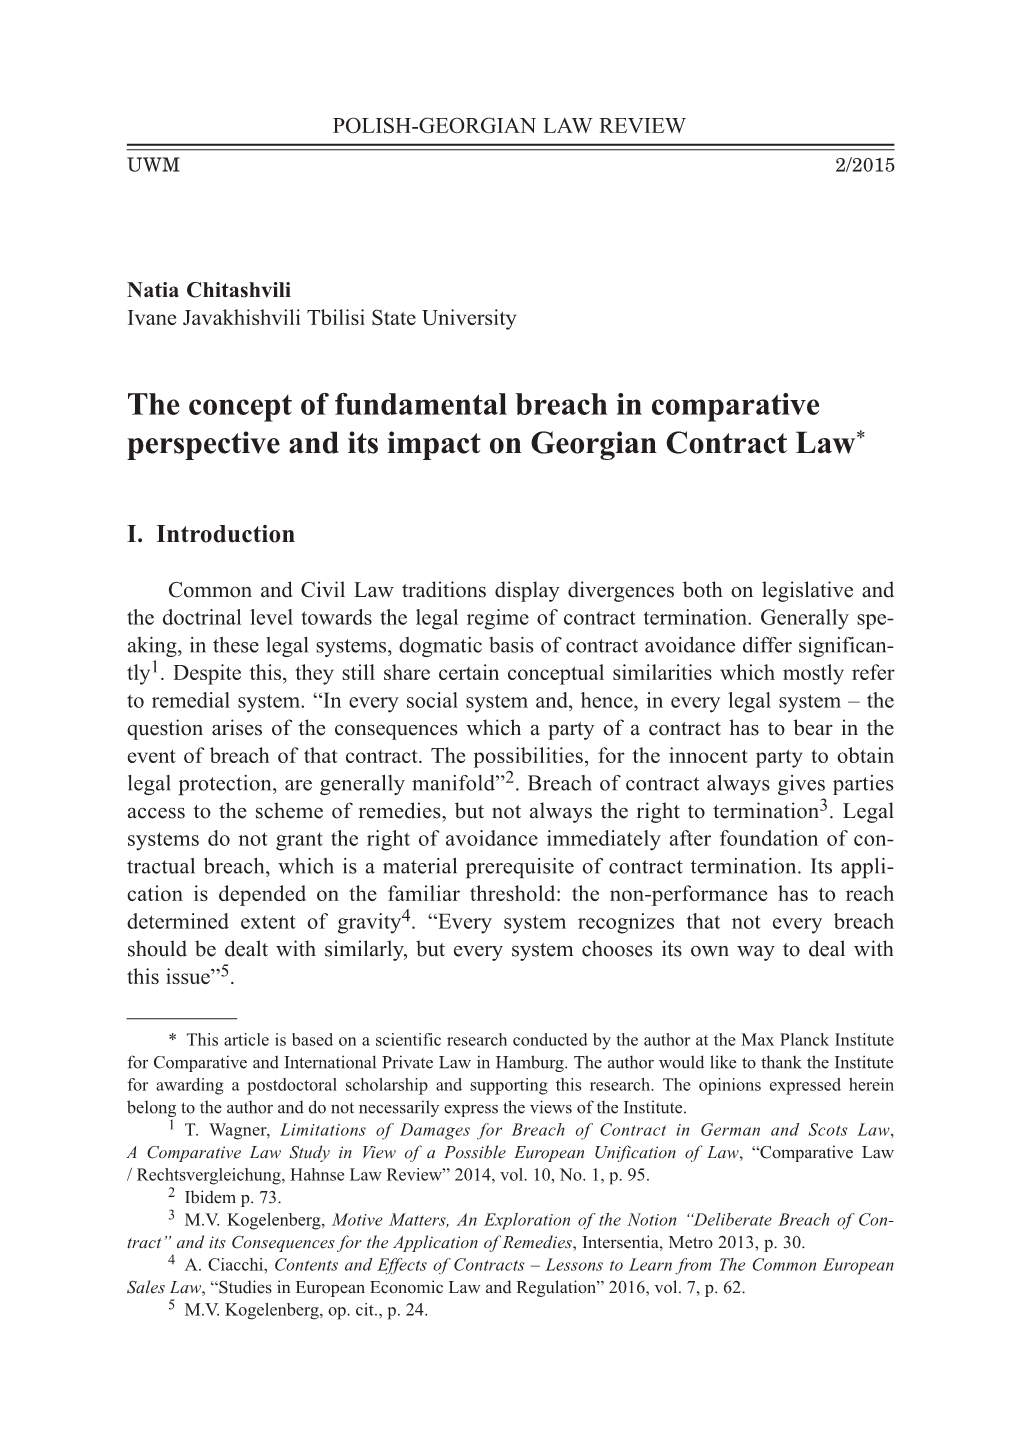 The Concept of Fundamental Breach in Comparative Perspective and Its Impact on Georgian Contract Law*